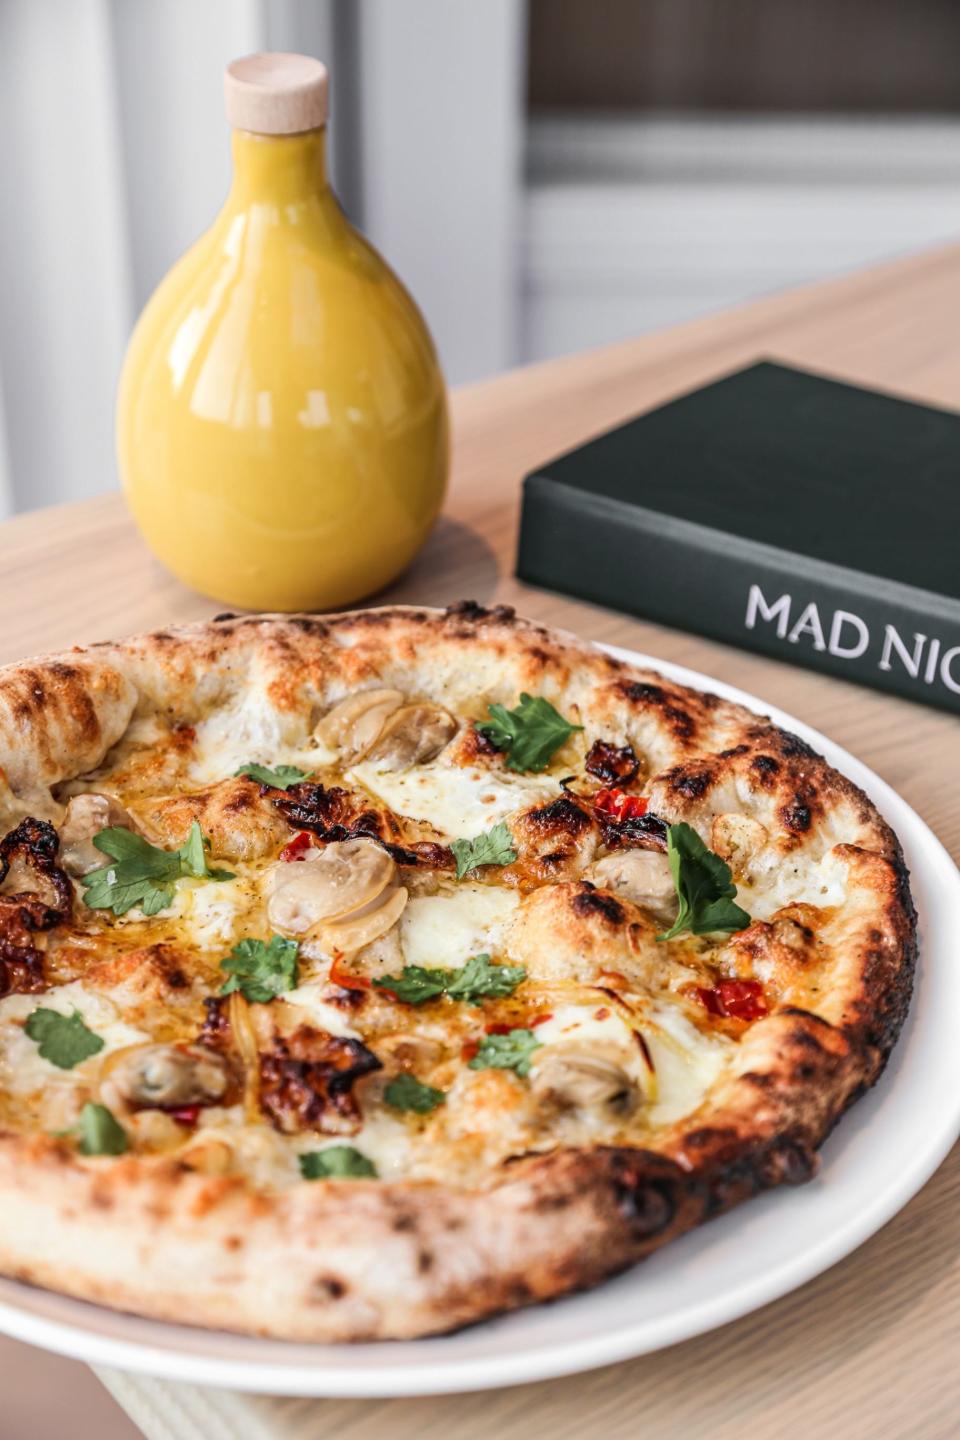 A selection of pizzas from fermented dough are a highlight on the menu at Mad Nice in Midtown.